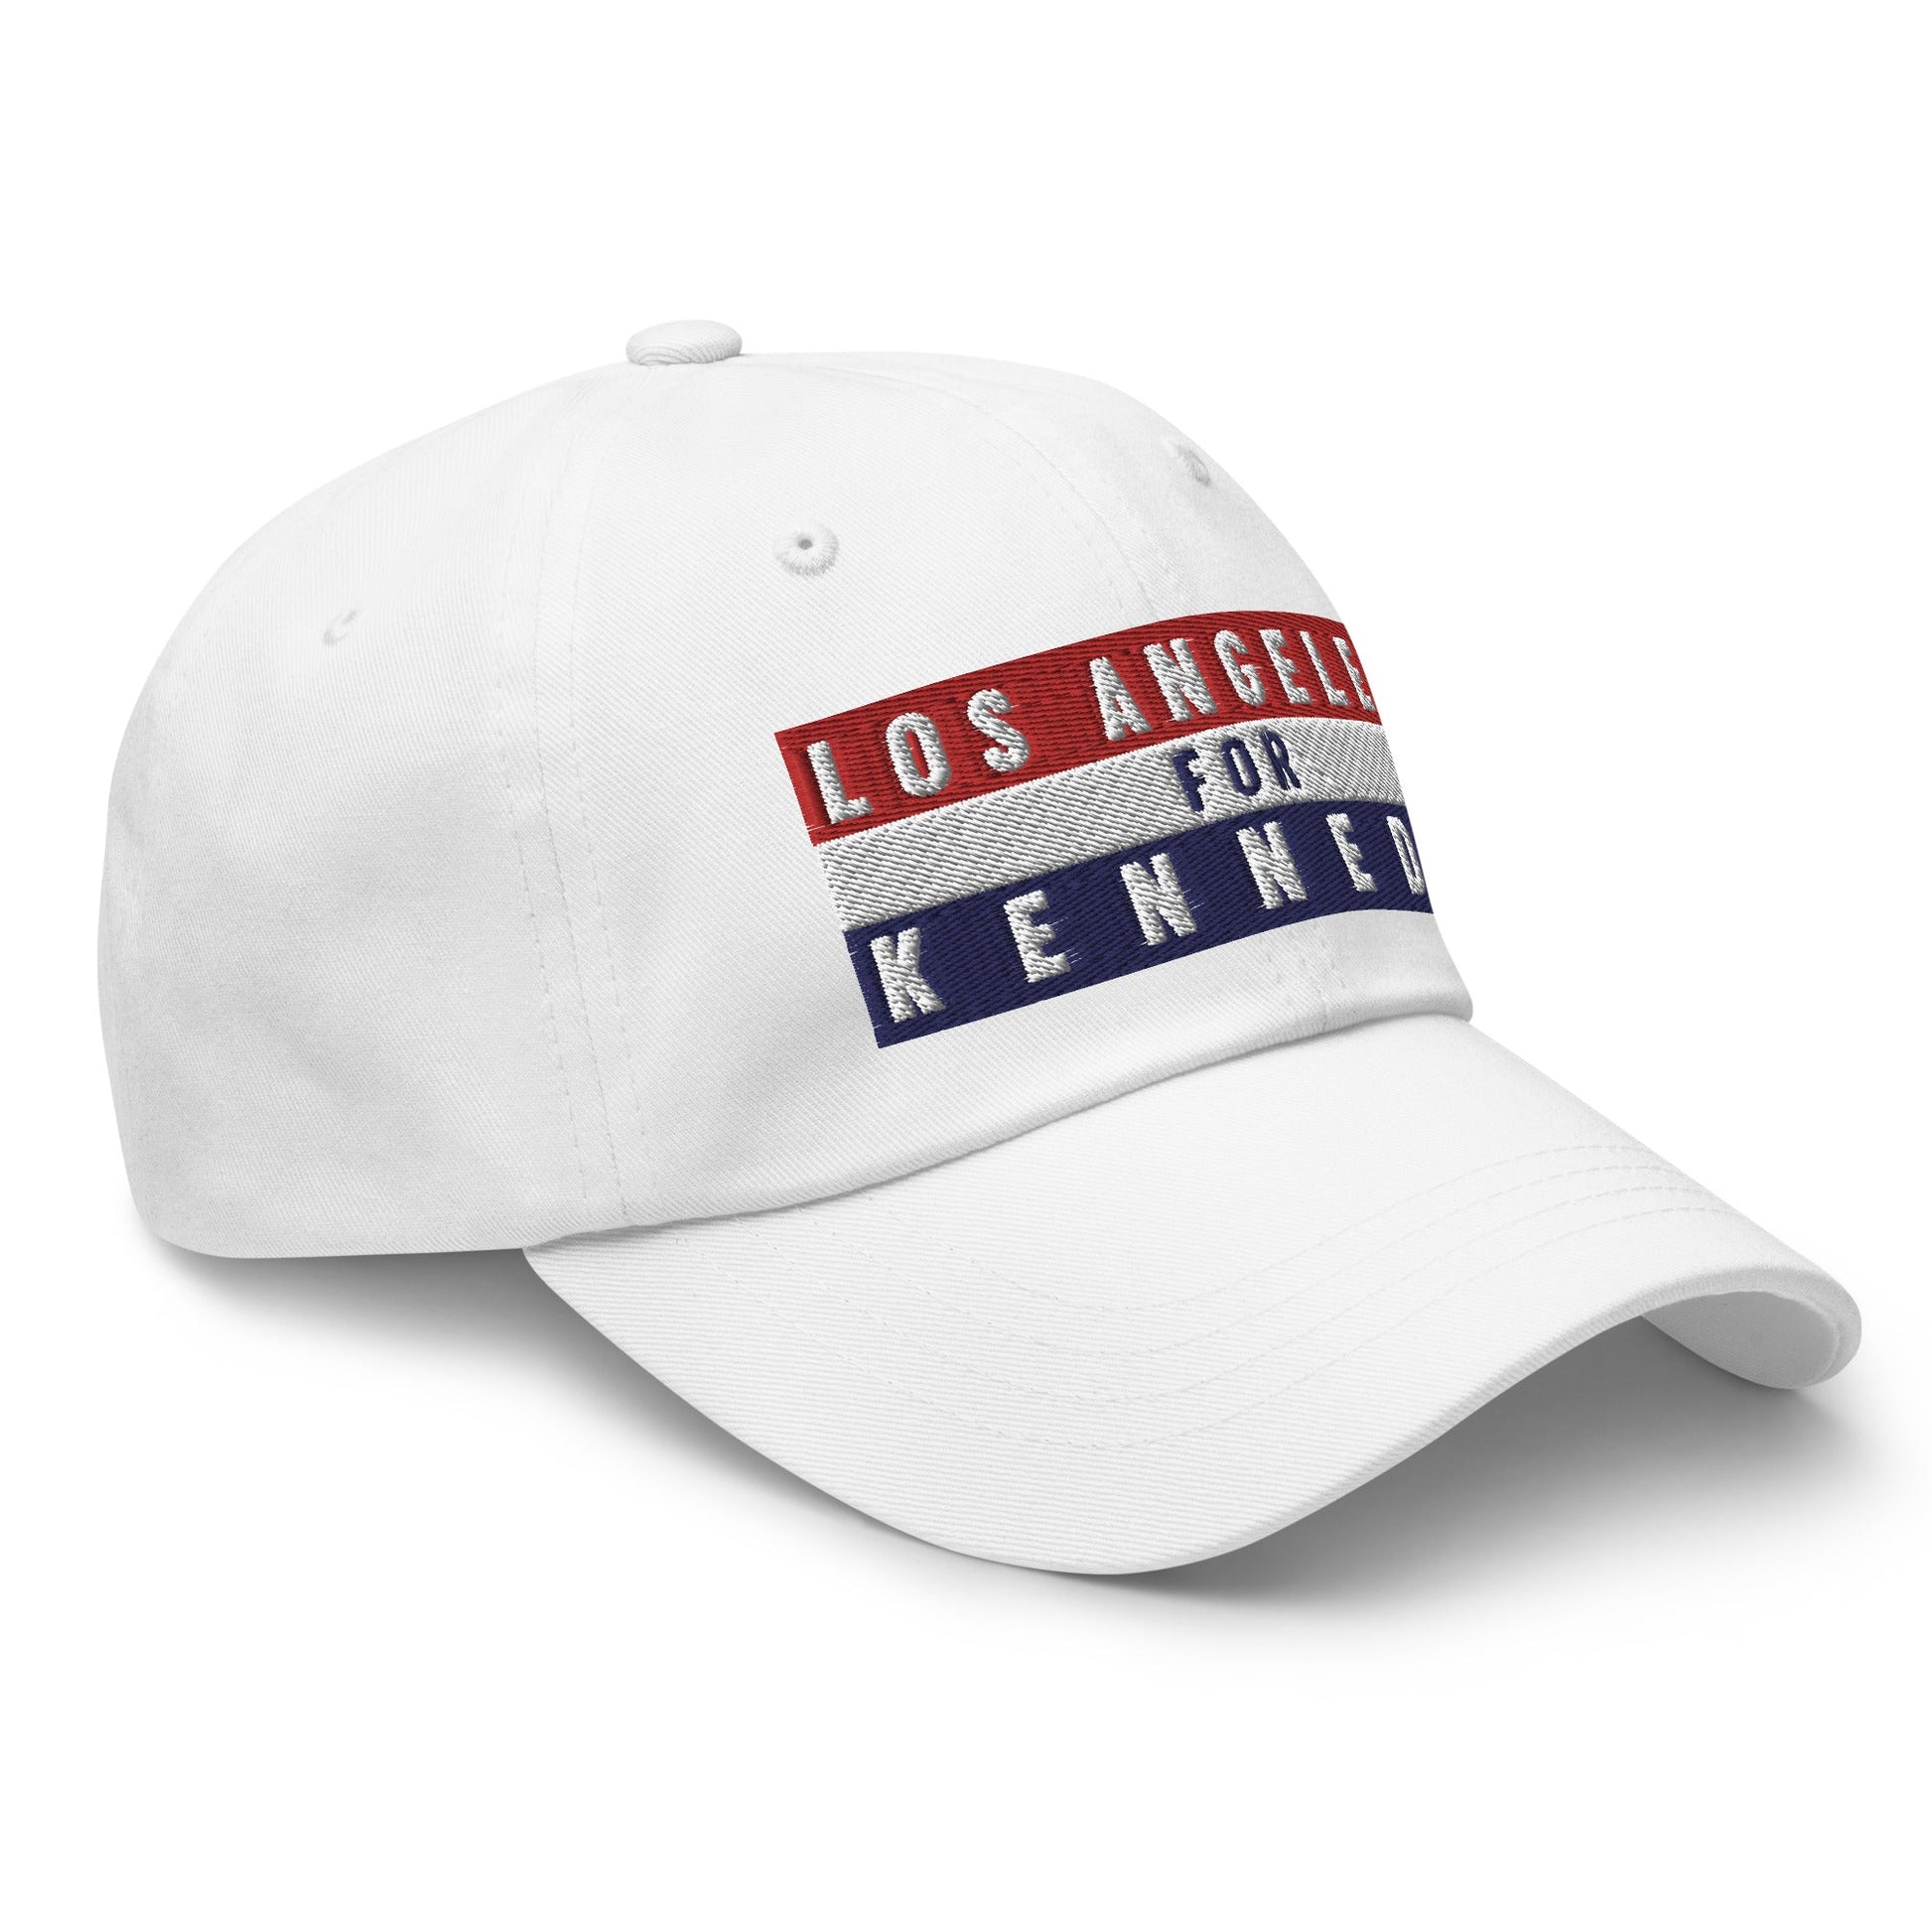 Los Angeles for Kennedy Dad Hat - TEAM KENNEDY. All rights reserved